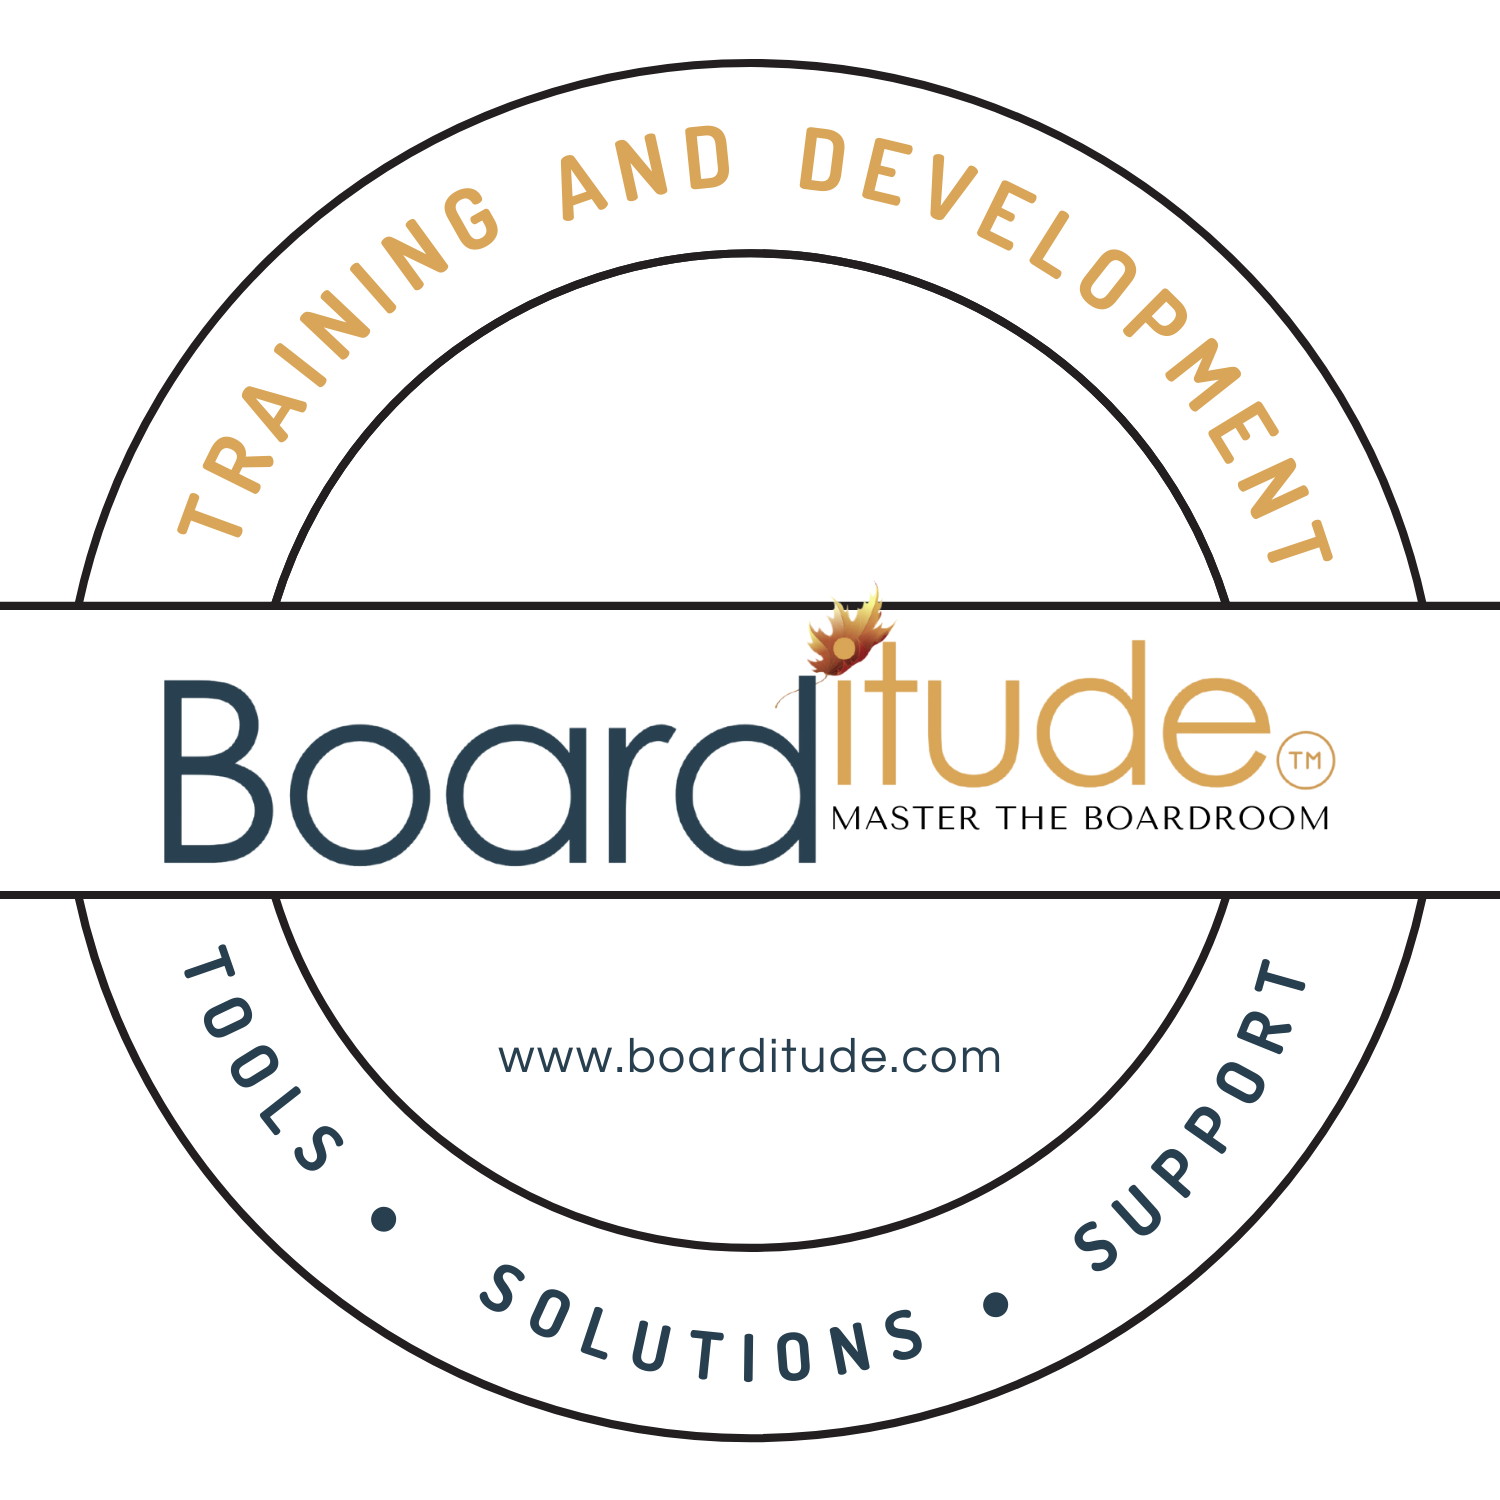 Boarditude Training, Development and Support Solutions